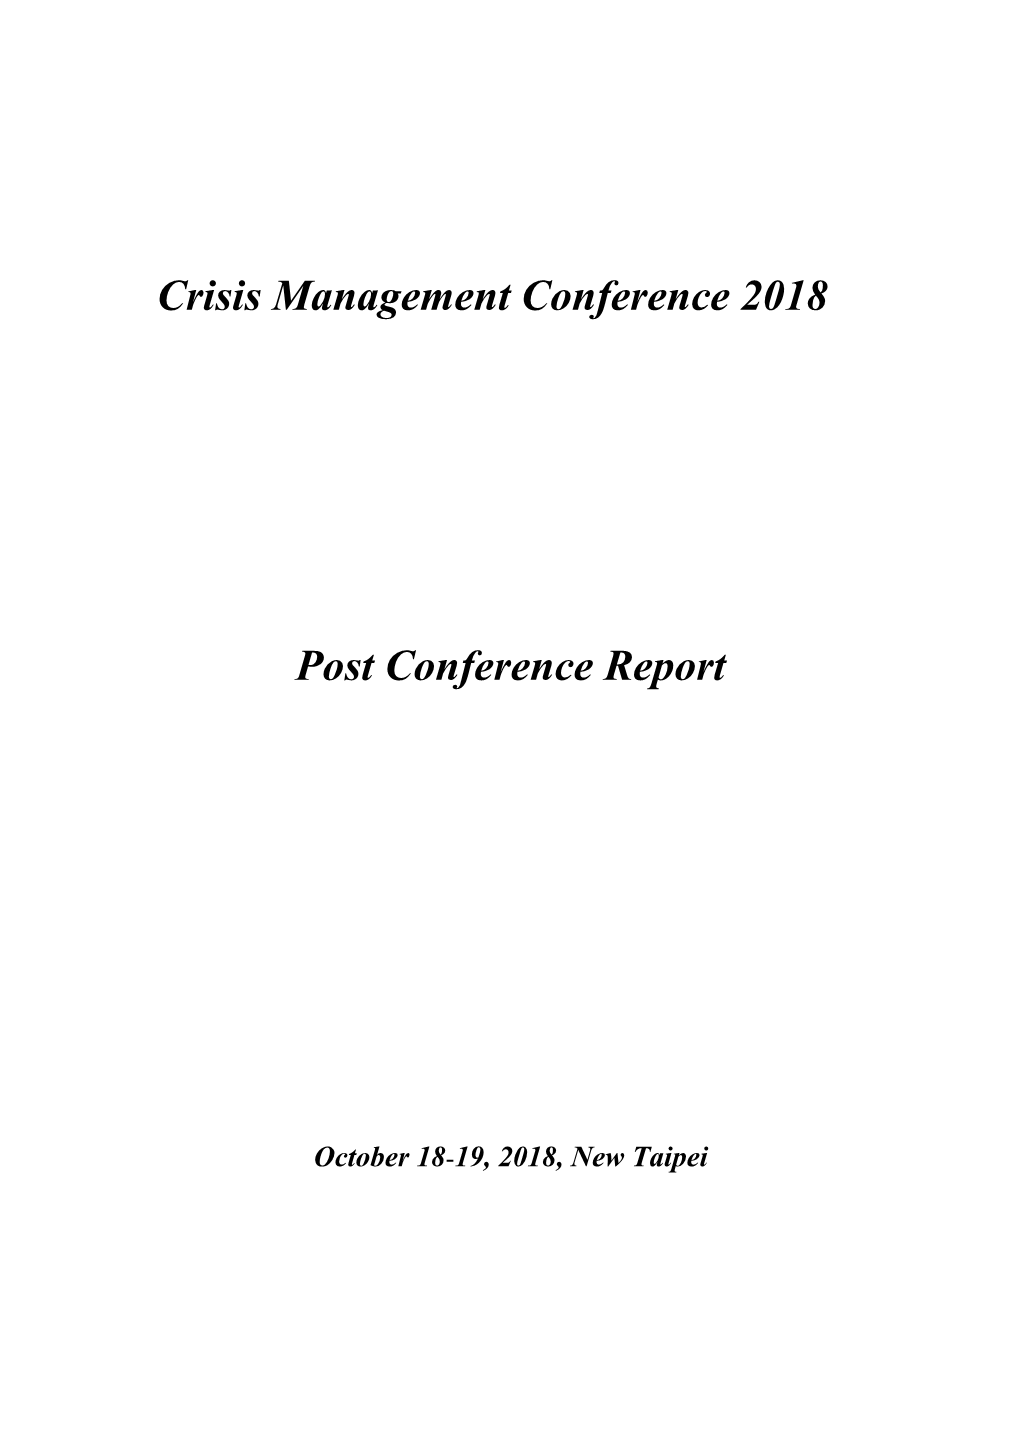 Crisis Management Conference 2018 Post Conference Report